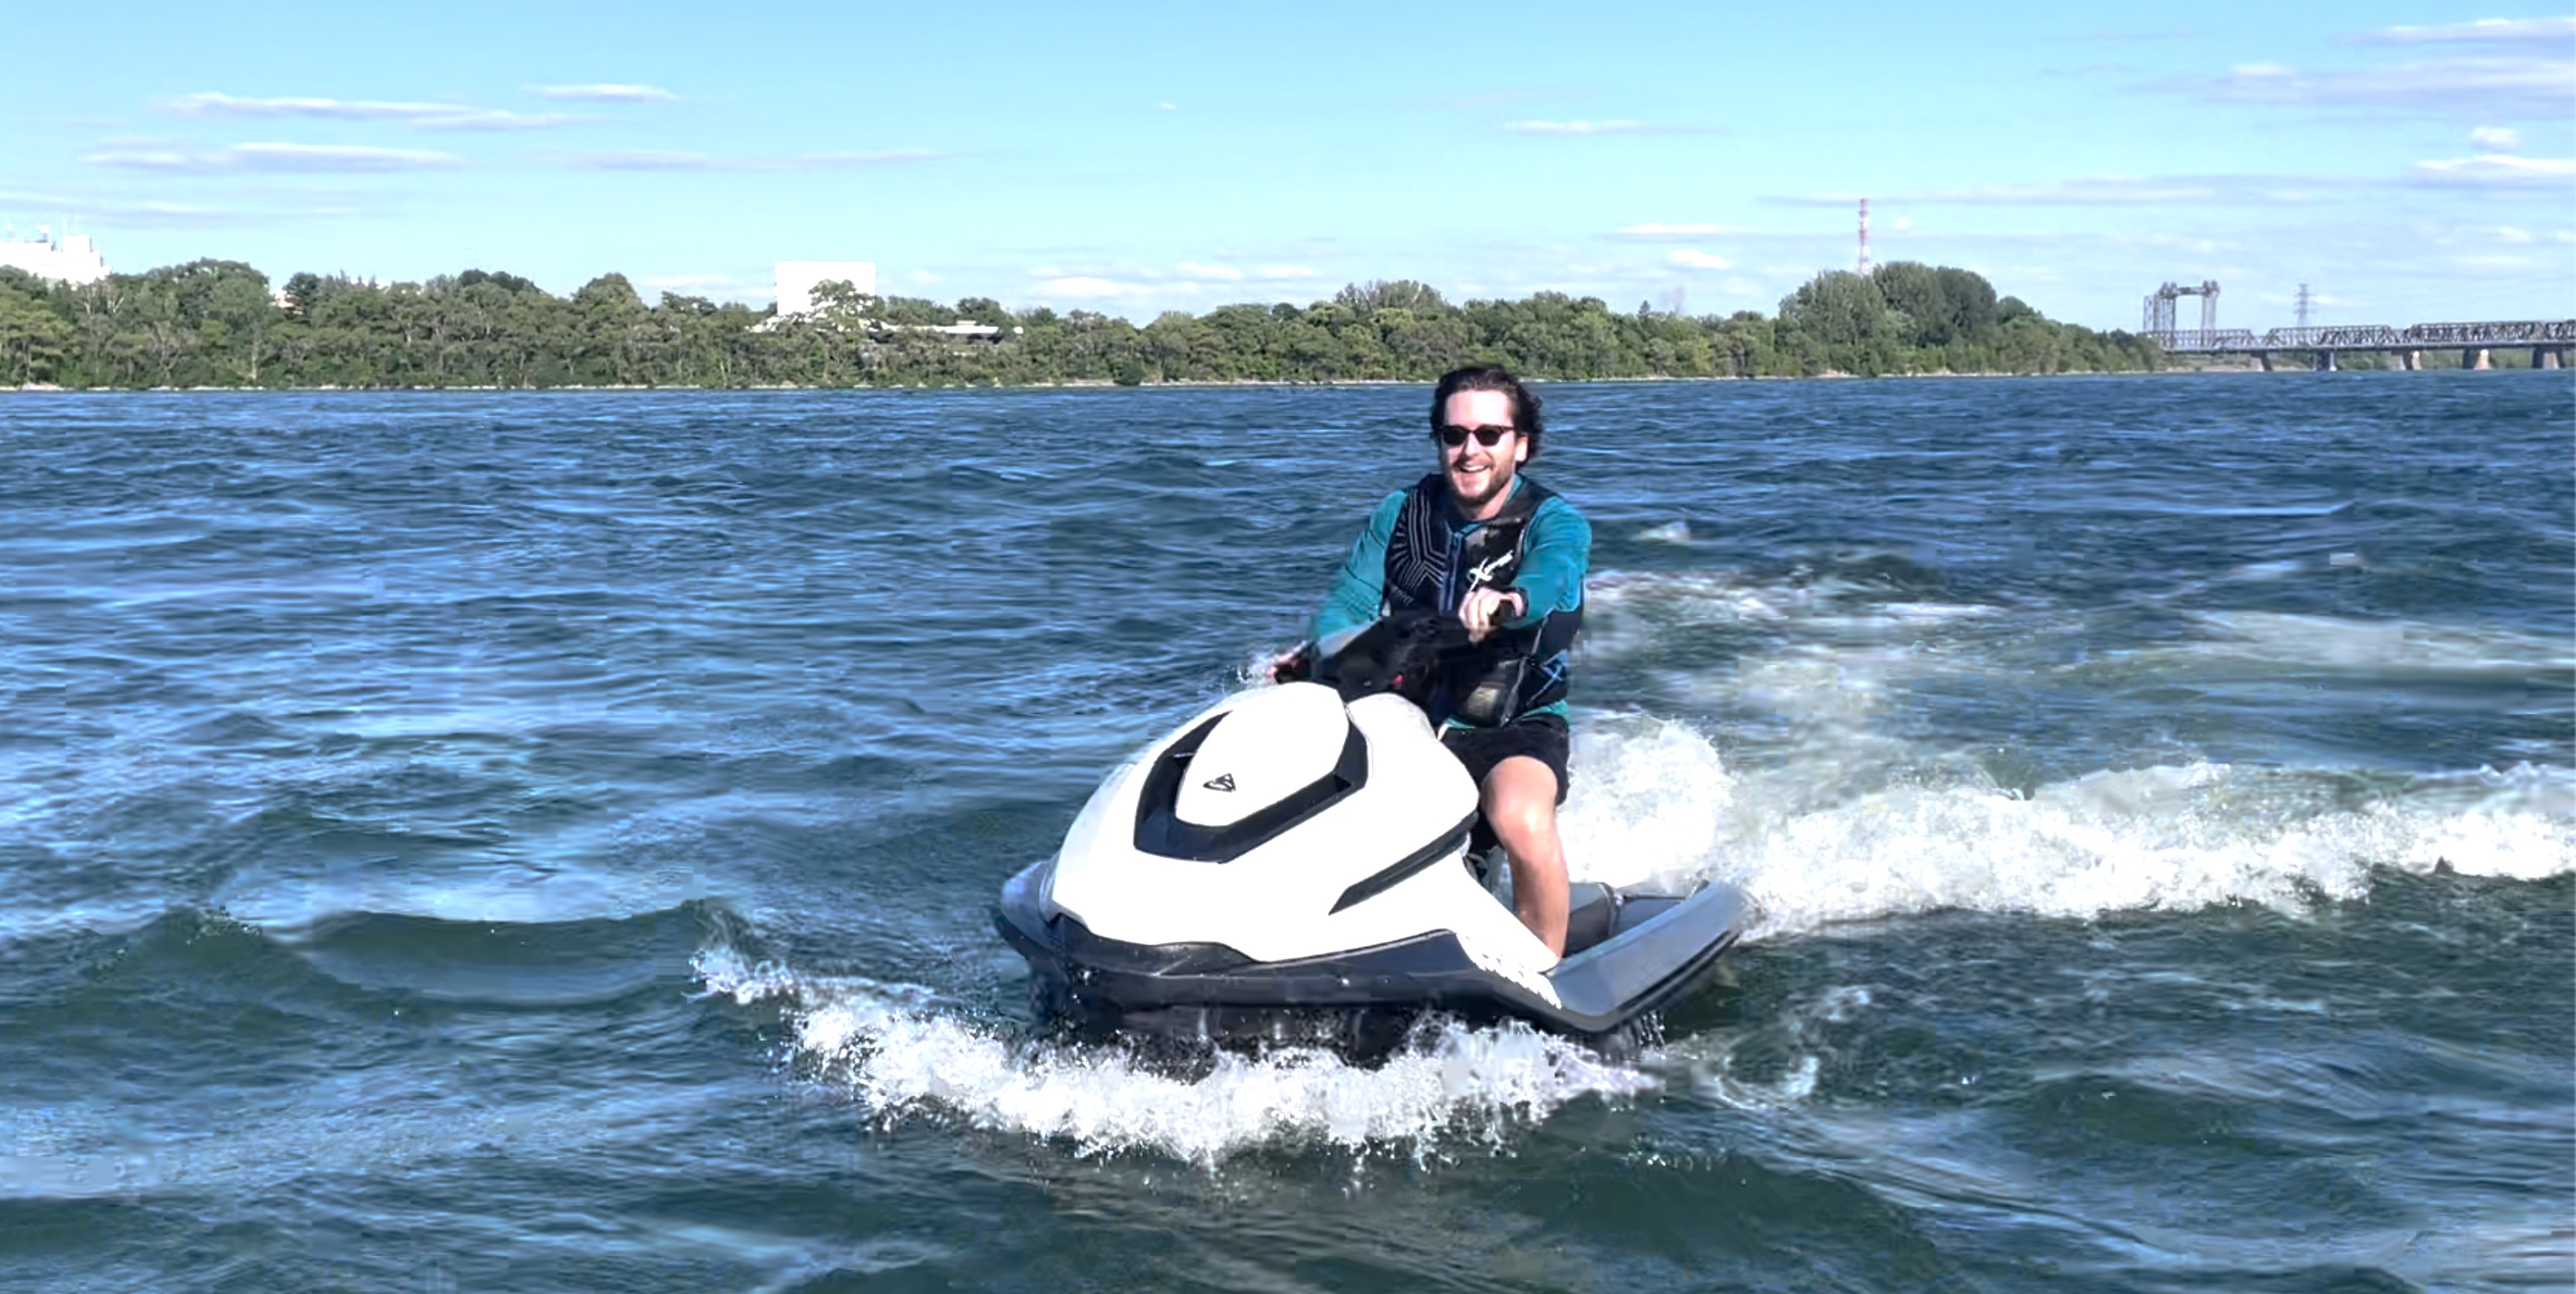 Taiga Orca electric jet ski is here, and it's pure unadulterated fun